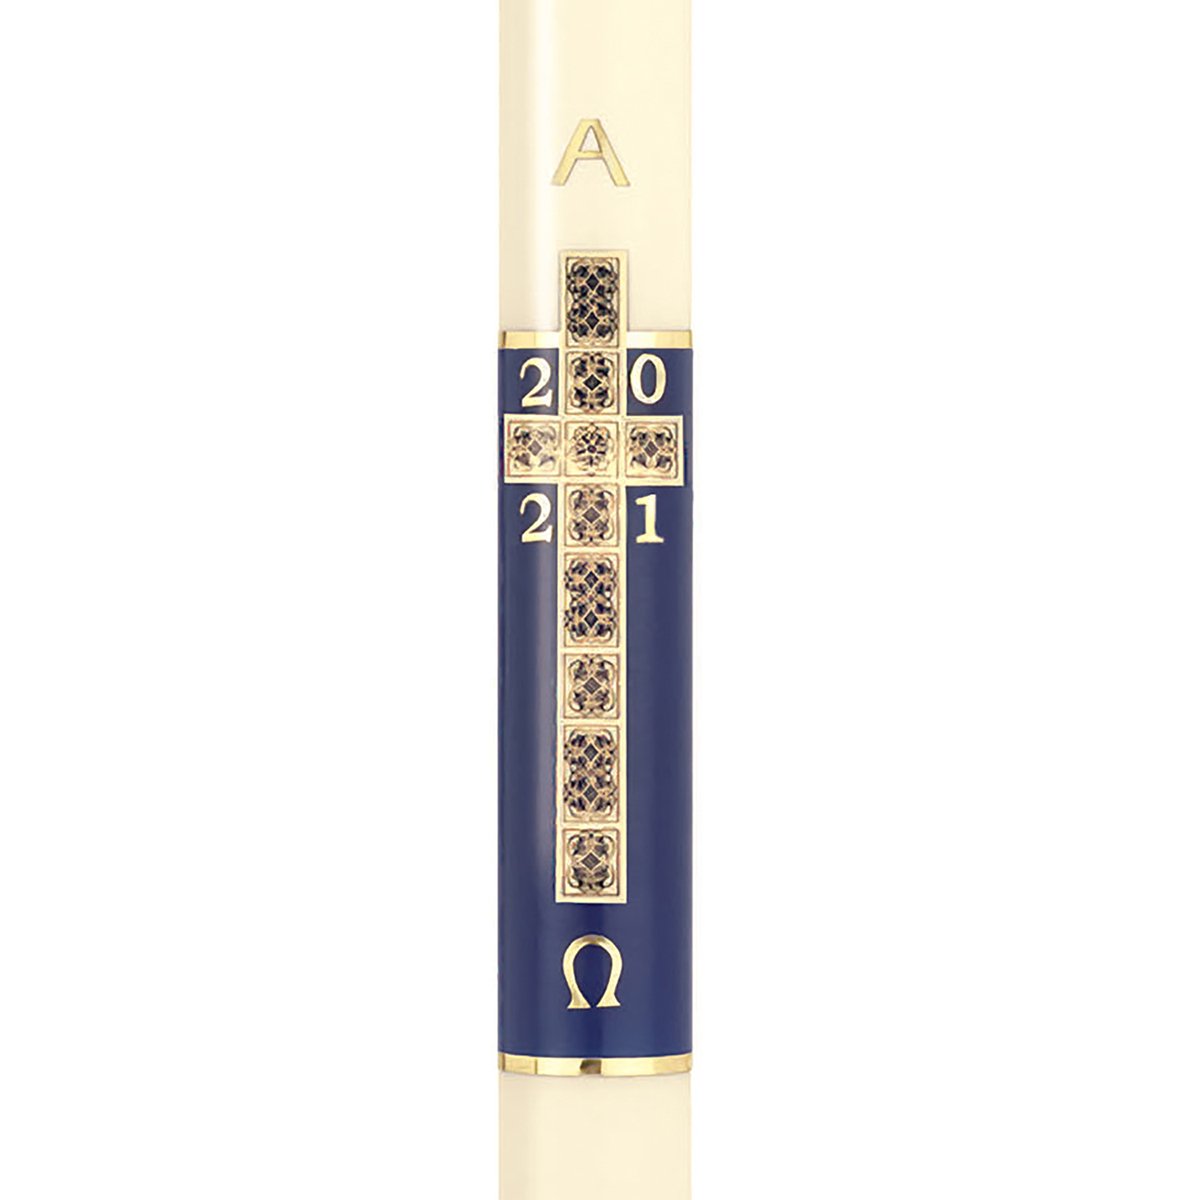 Will & Baumer Paschal Candle Holy Cross 1 15/16″ x 27″